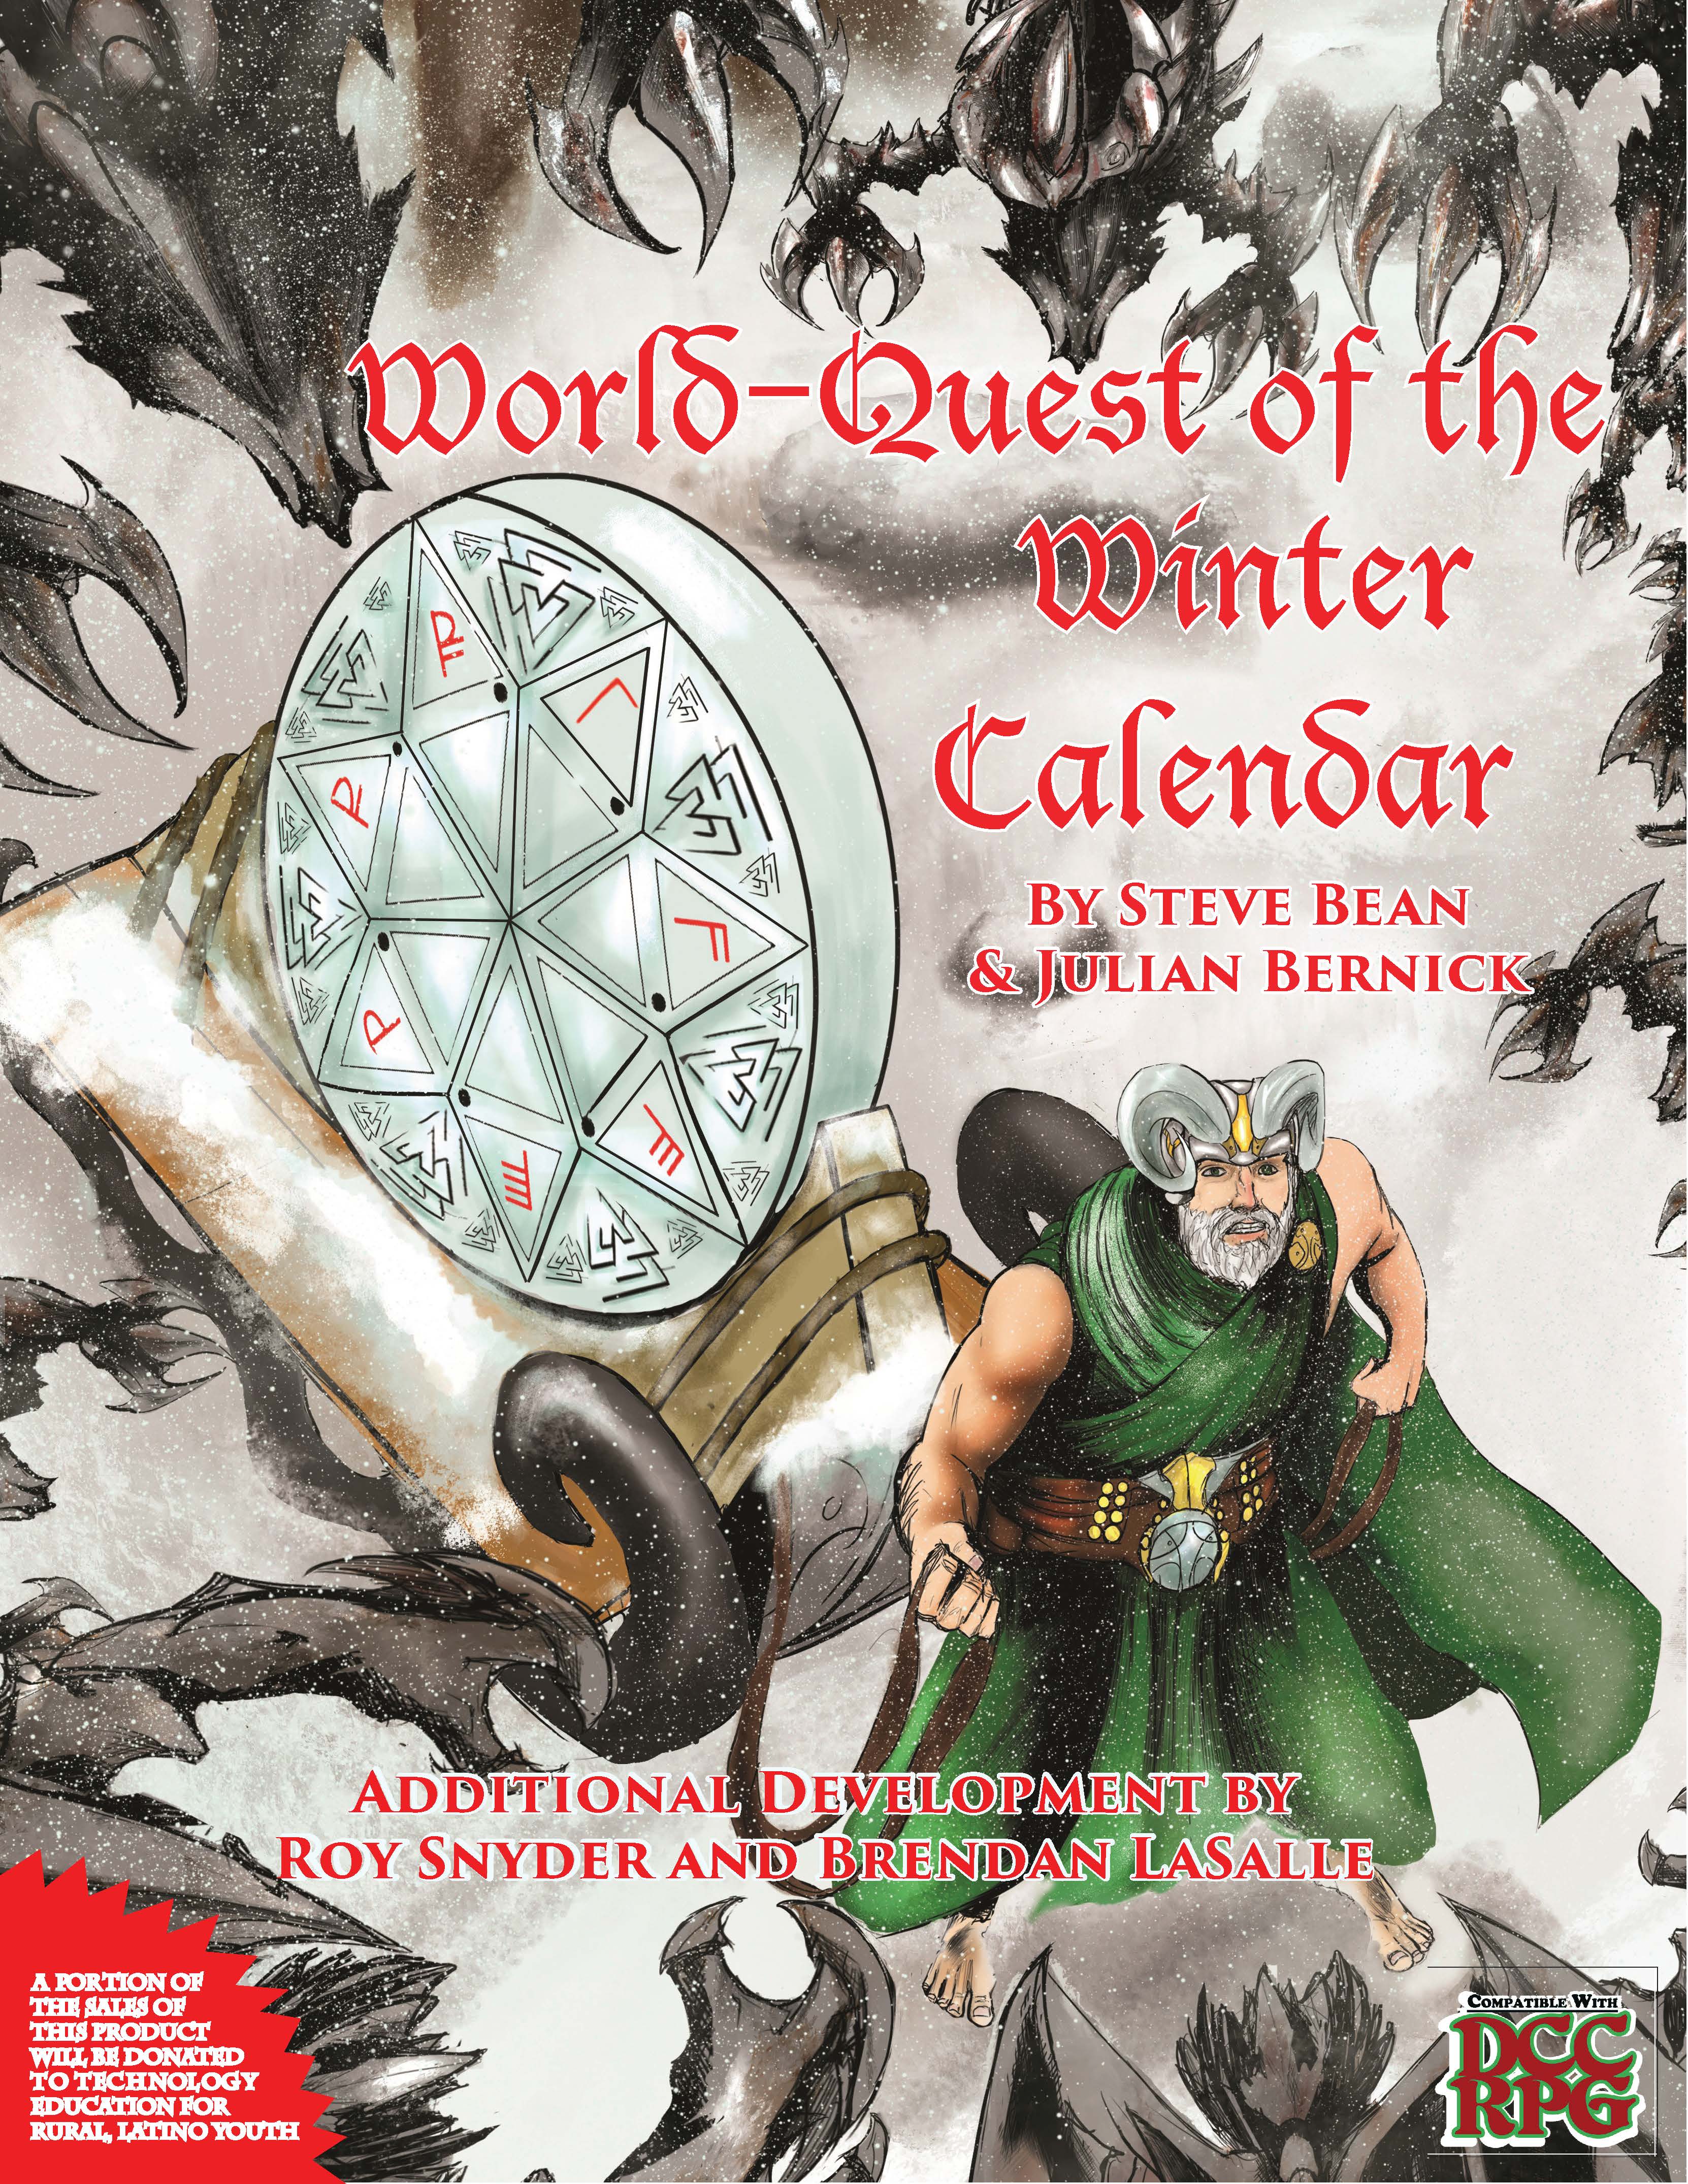 World-Quest of the Winter Calendar: The World-Shaping 0-Lvl DCC Funnel